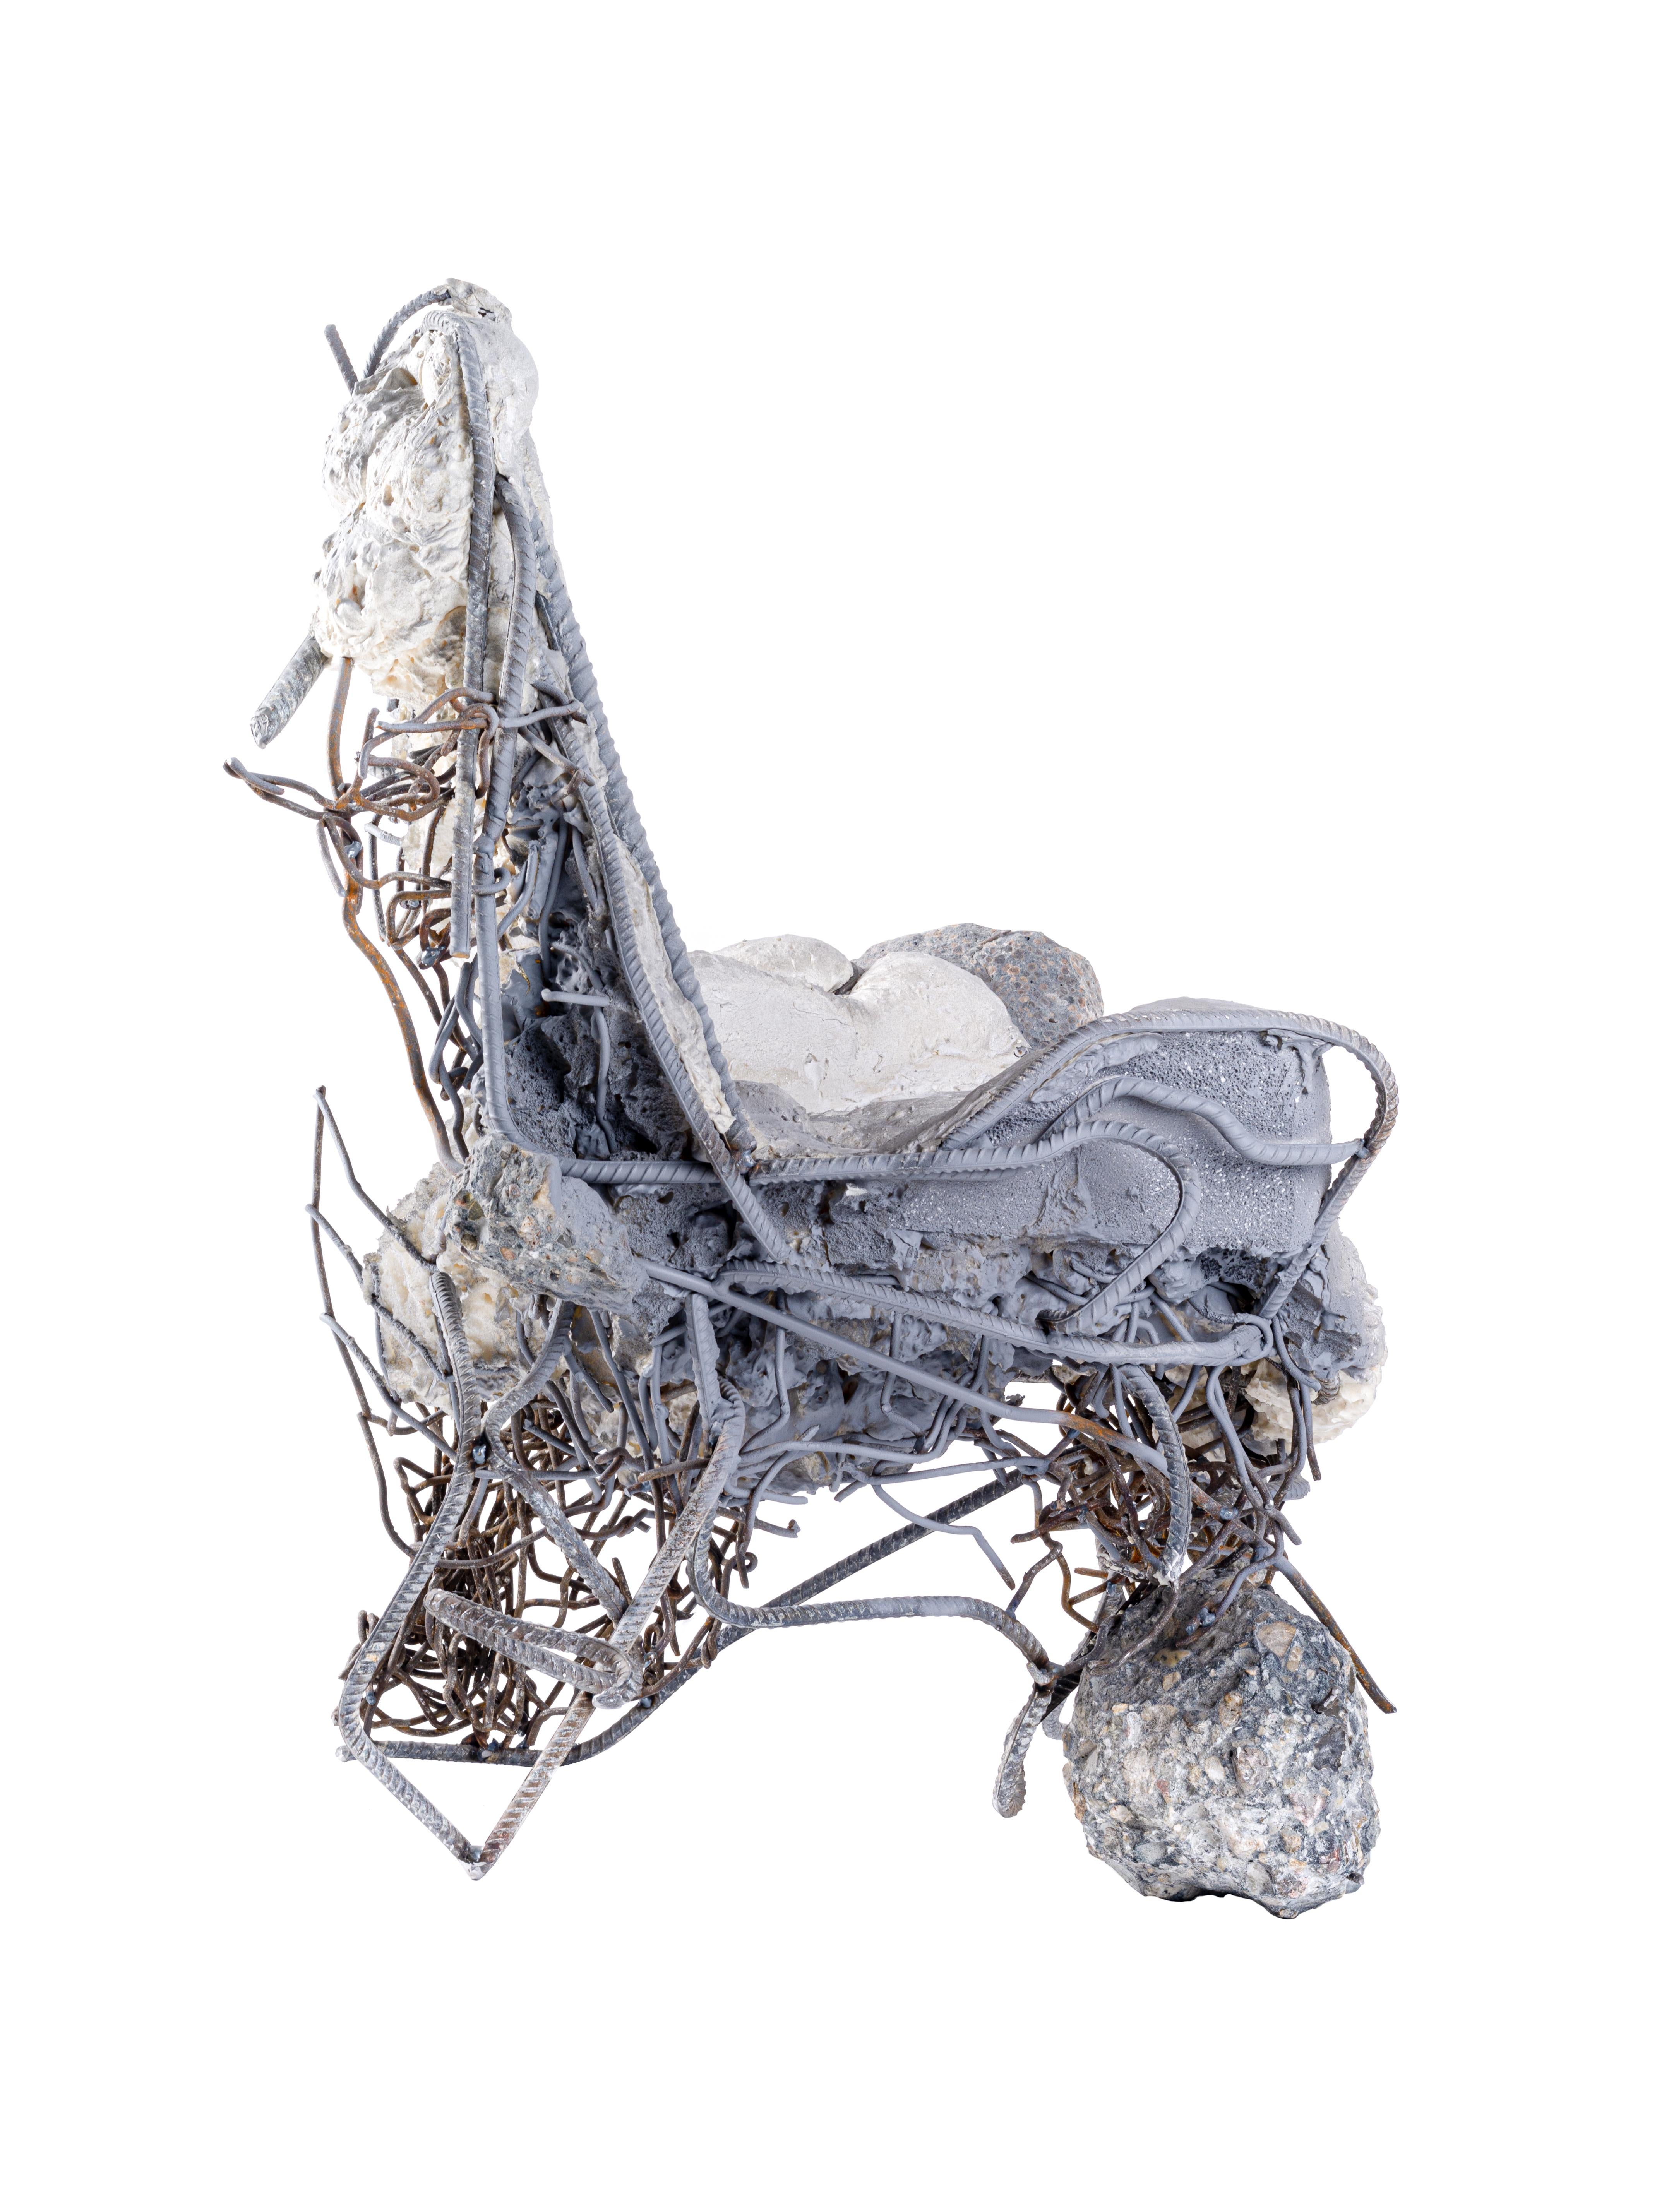 This modern Art Chair is made by JORDAN ARTISAN (Nijmegen, 1979). The Reconstruction chair is an Artwork made of Concrete, Rebar and EPS. Jordan has found the materials at the construction site next to his atelier where a former factory was